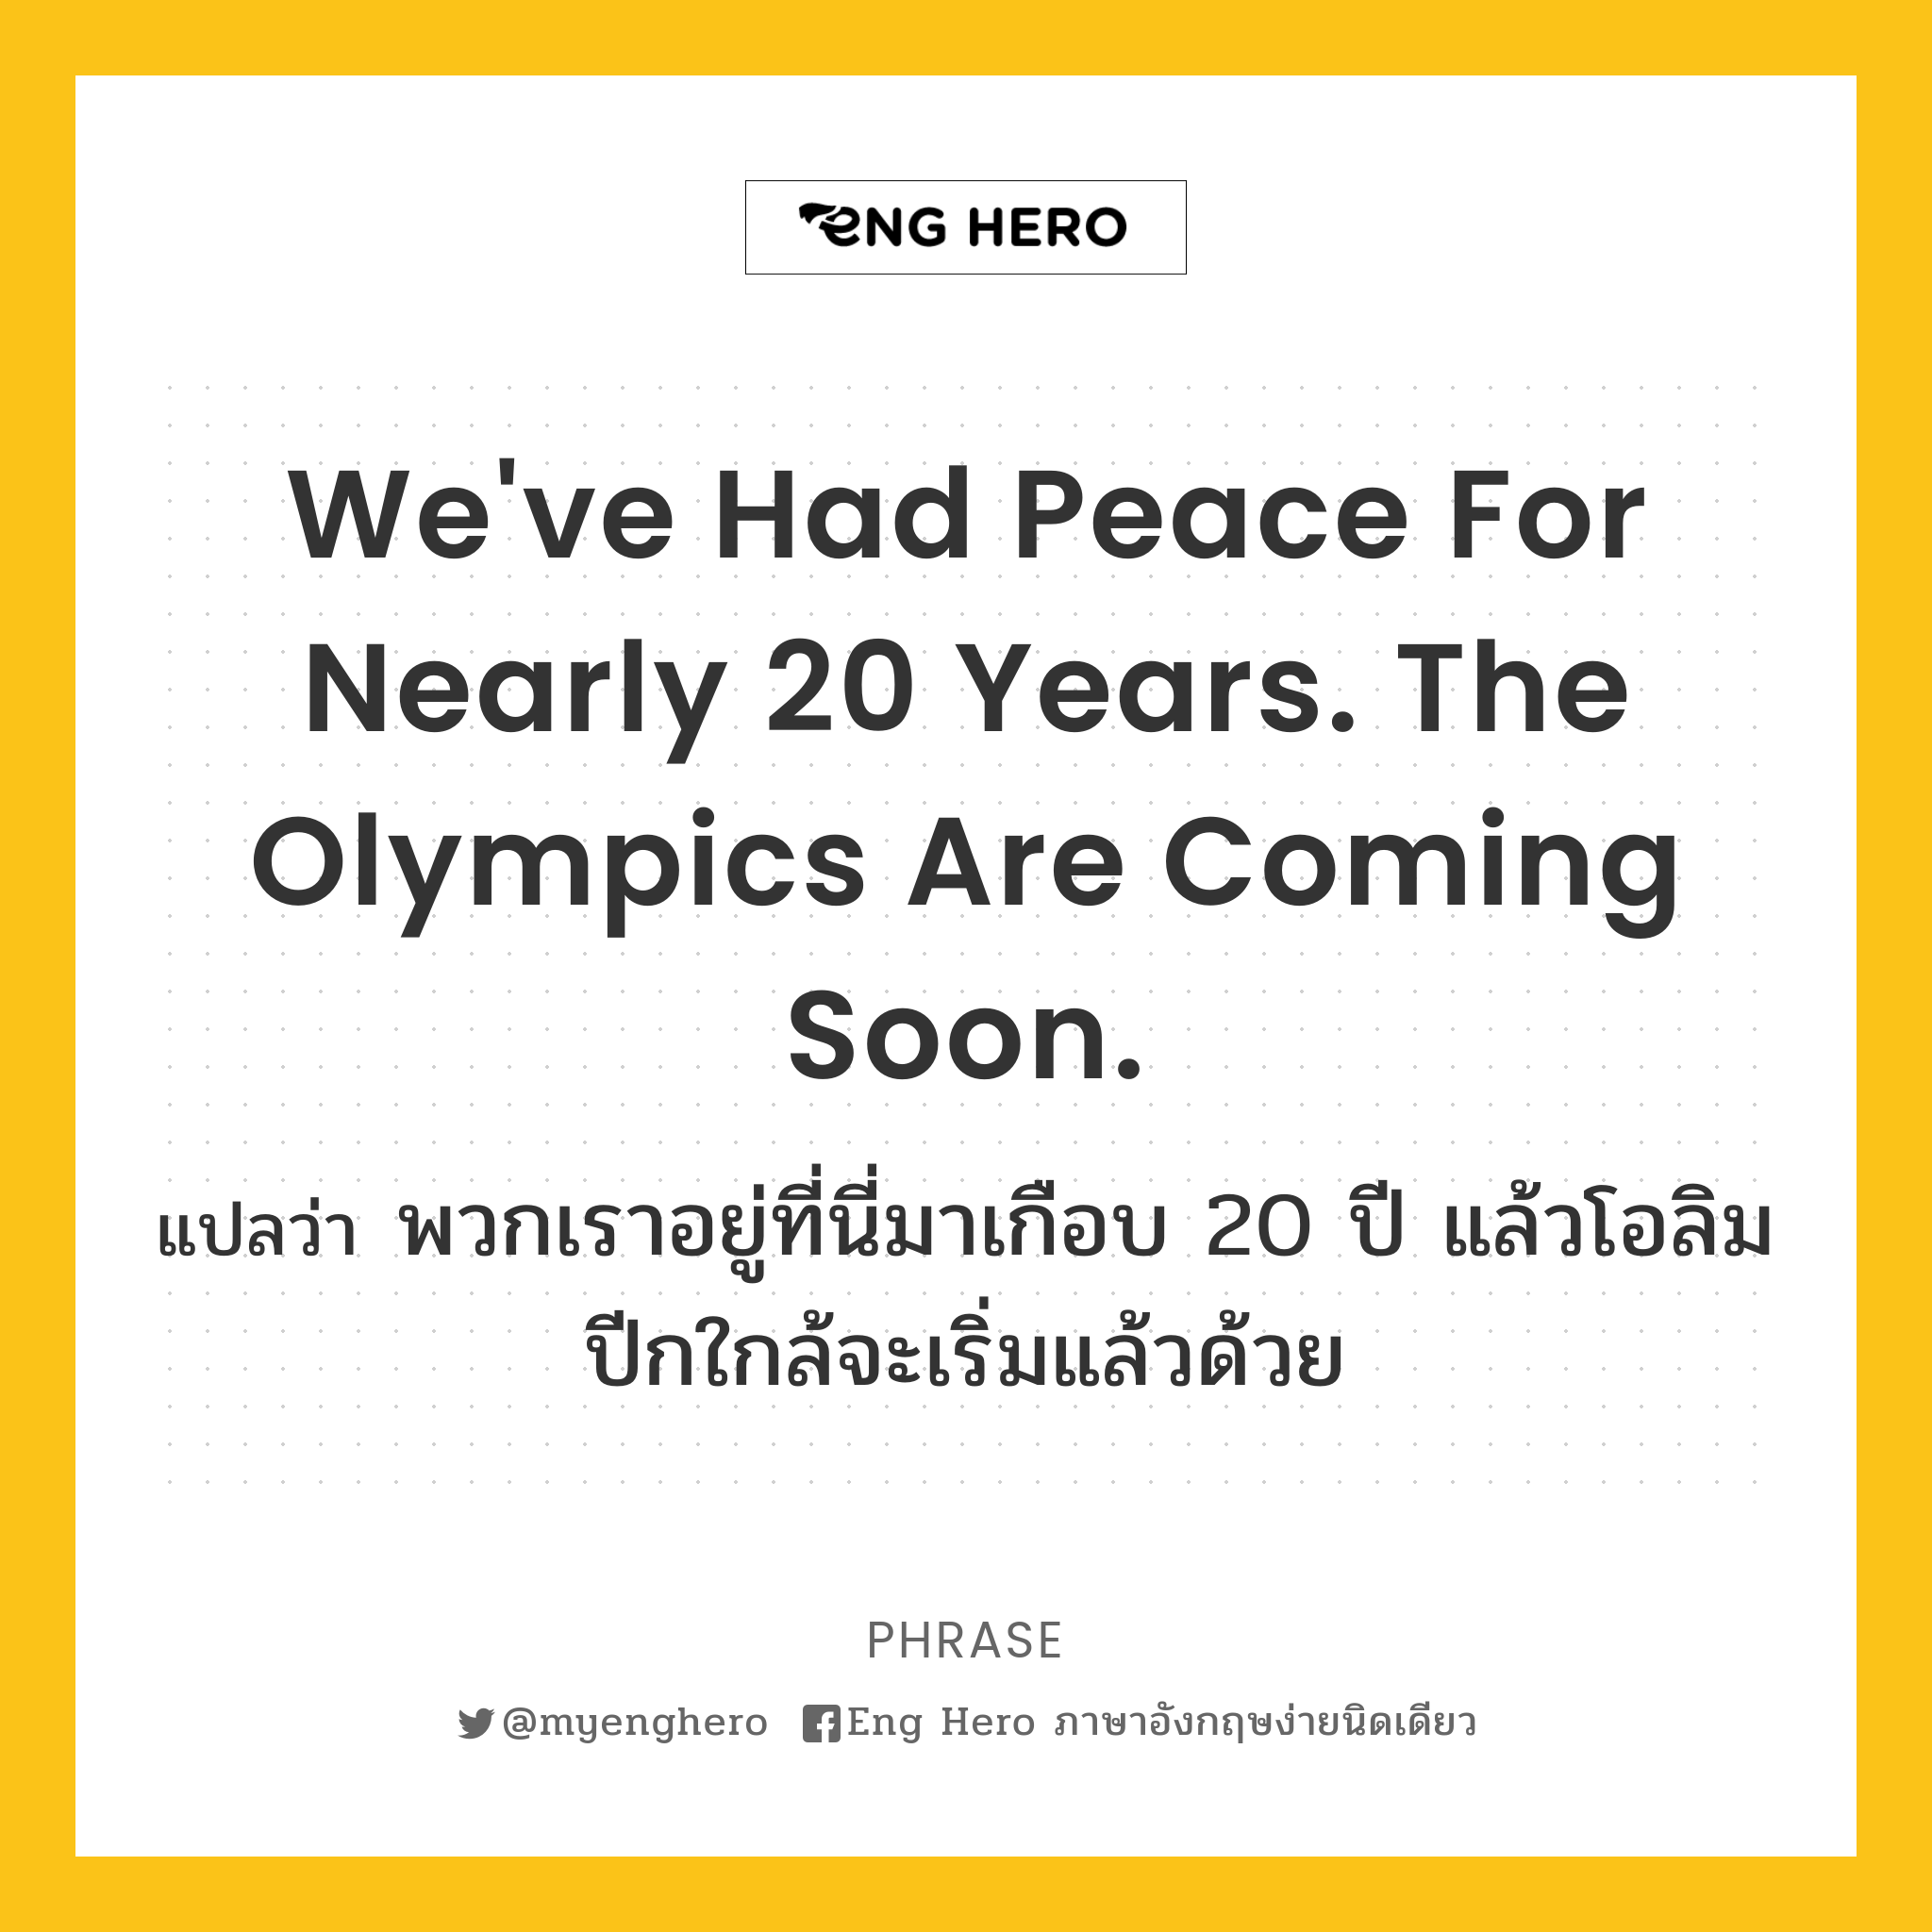 We've had peace for nearly 20 years. The Olympics are coming soon.